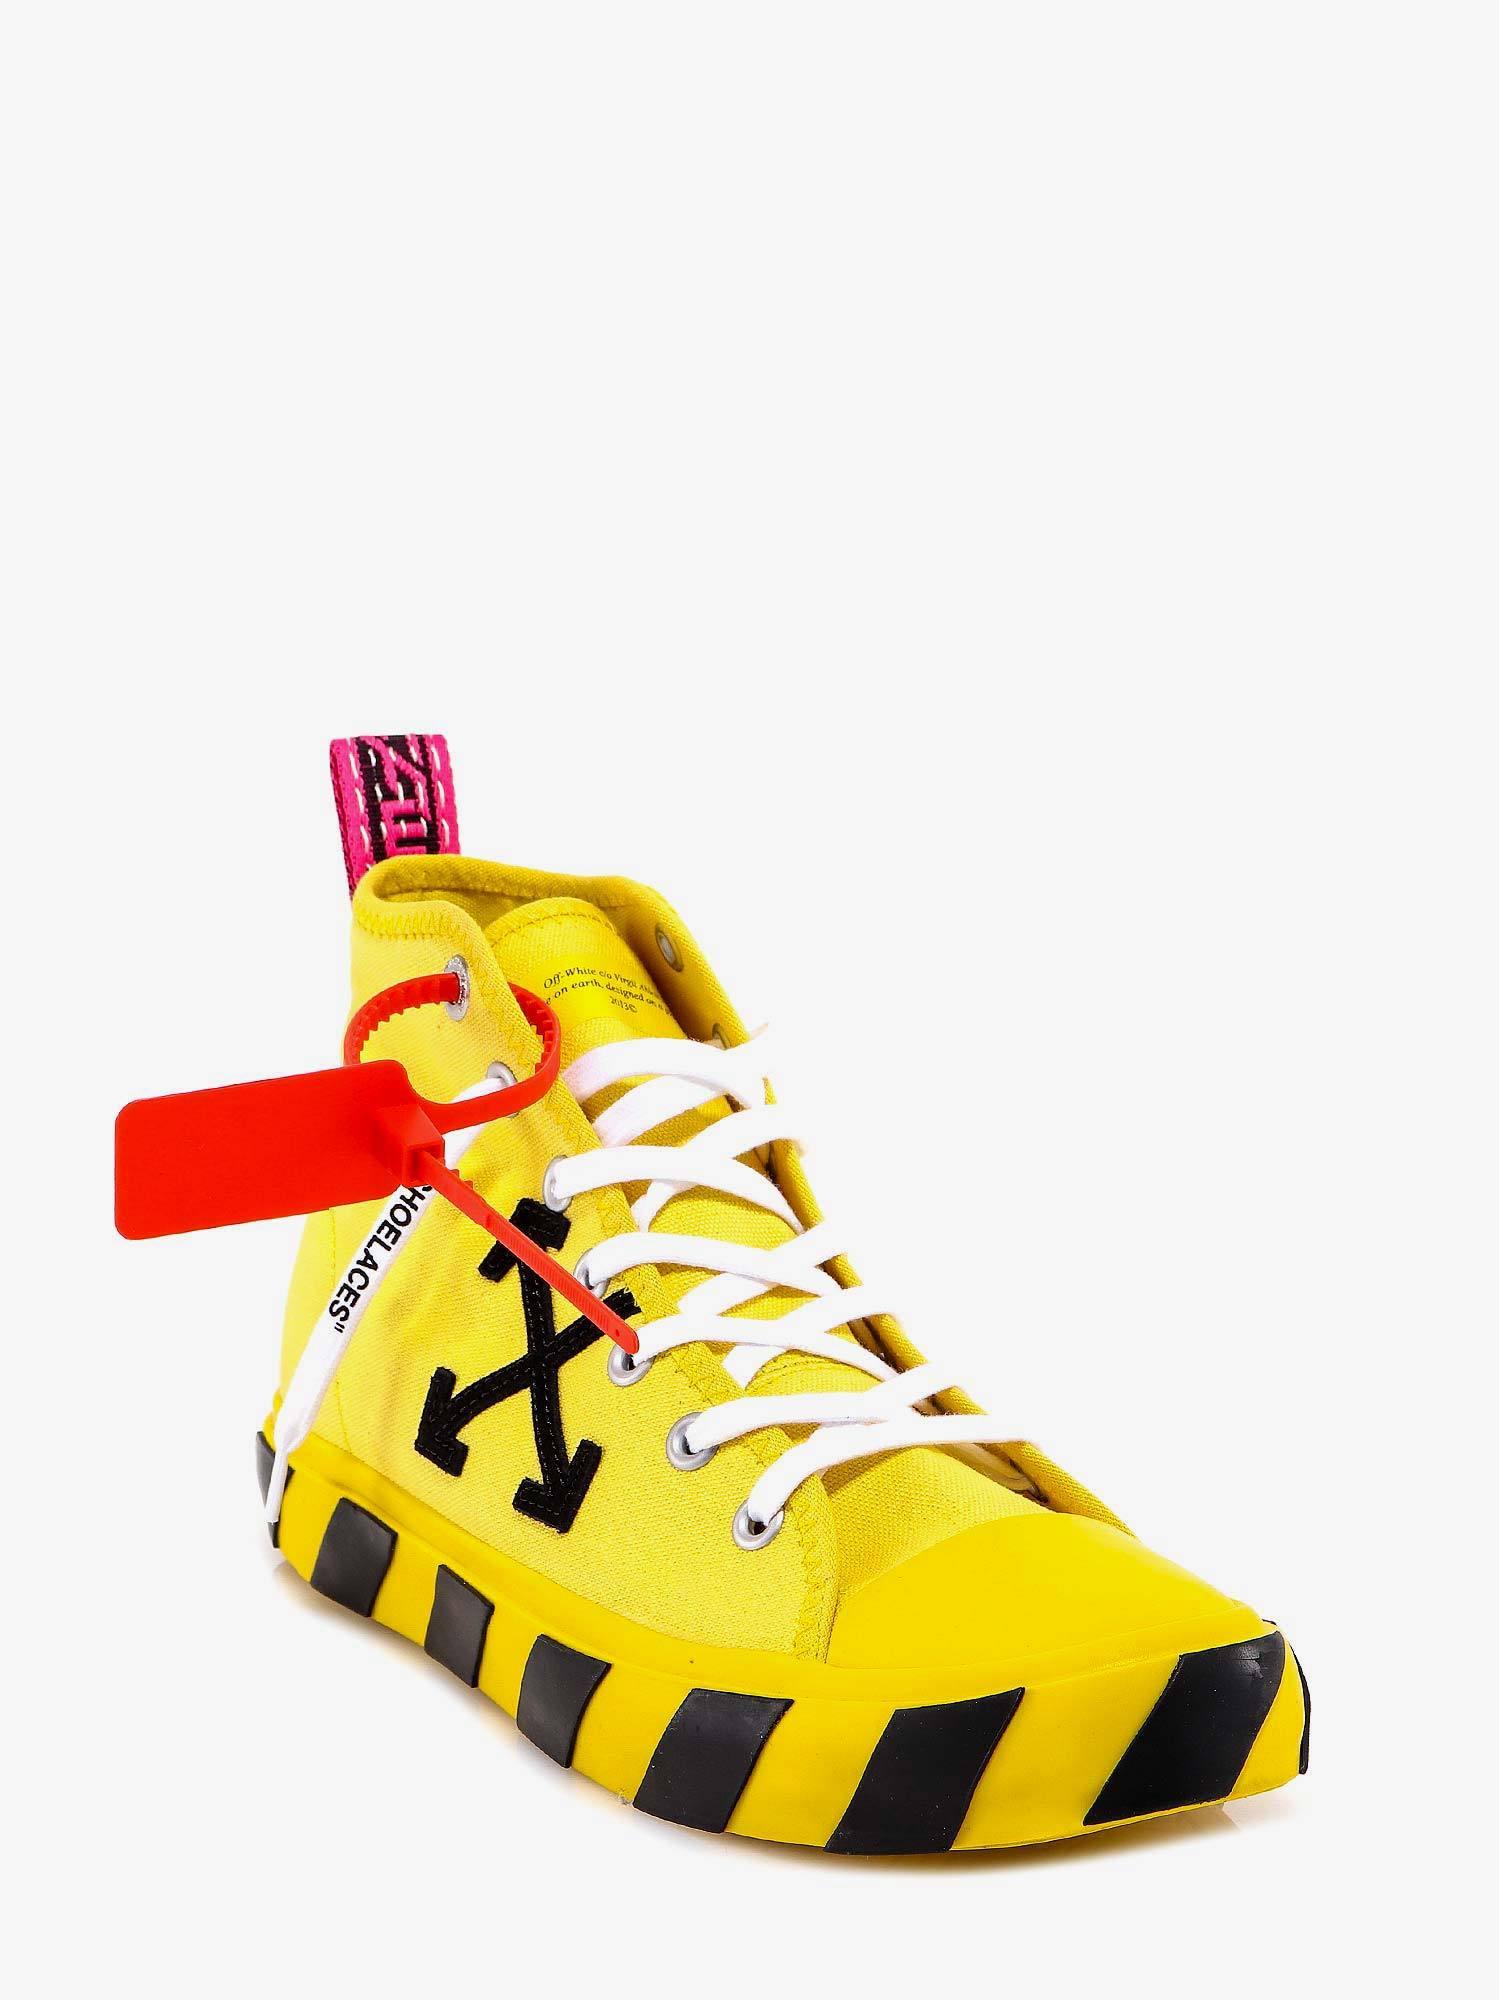 Off-White c/o Virgil Abloh Mid Top Sneakers in Yellow for Men - Lyst